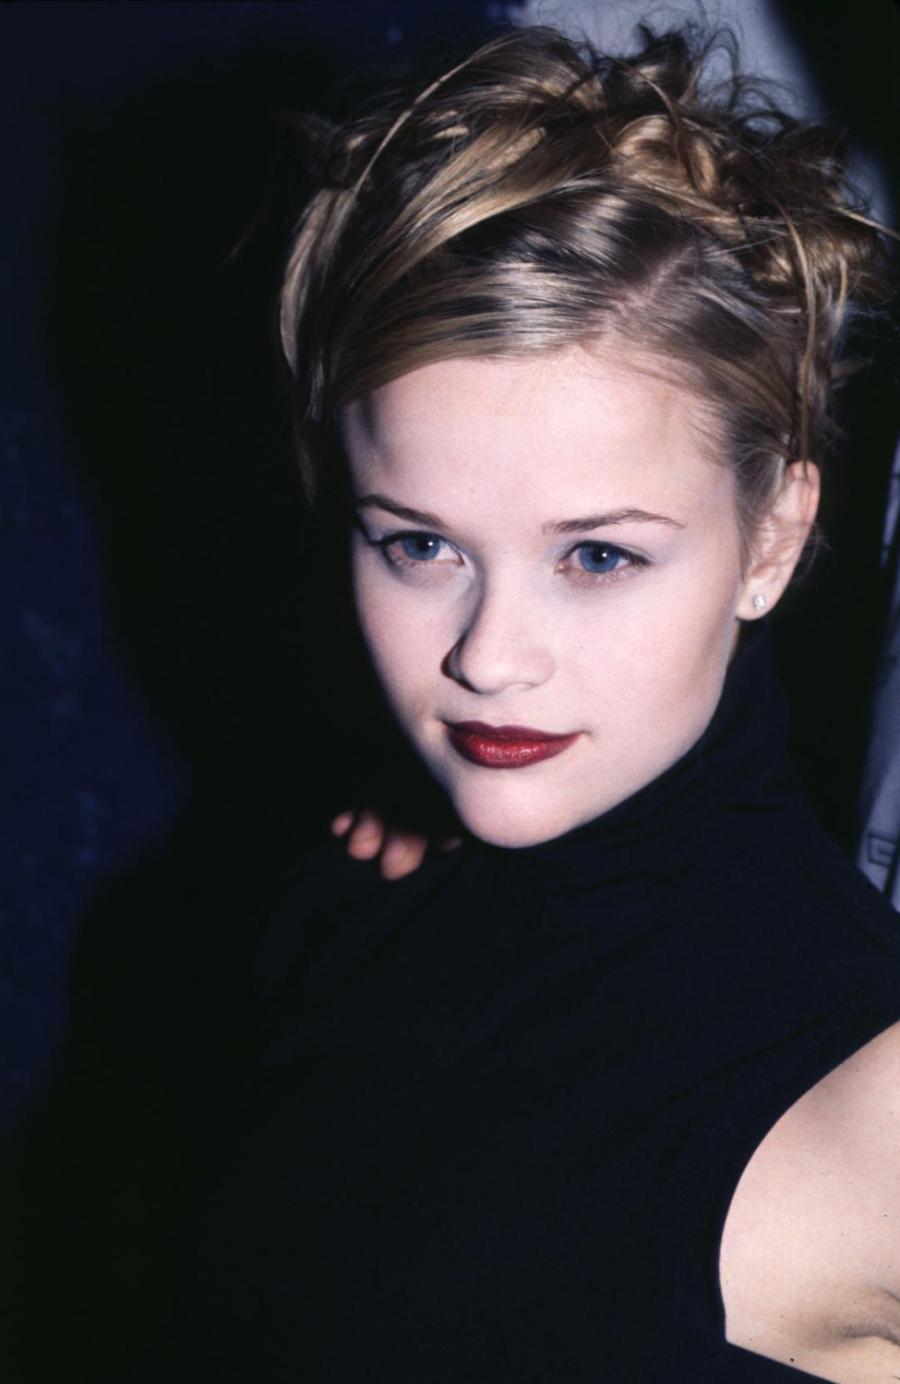 Reese Whiterspoon, 1996 (Fot. Steve Eichner/WireImage/Getty Images)